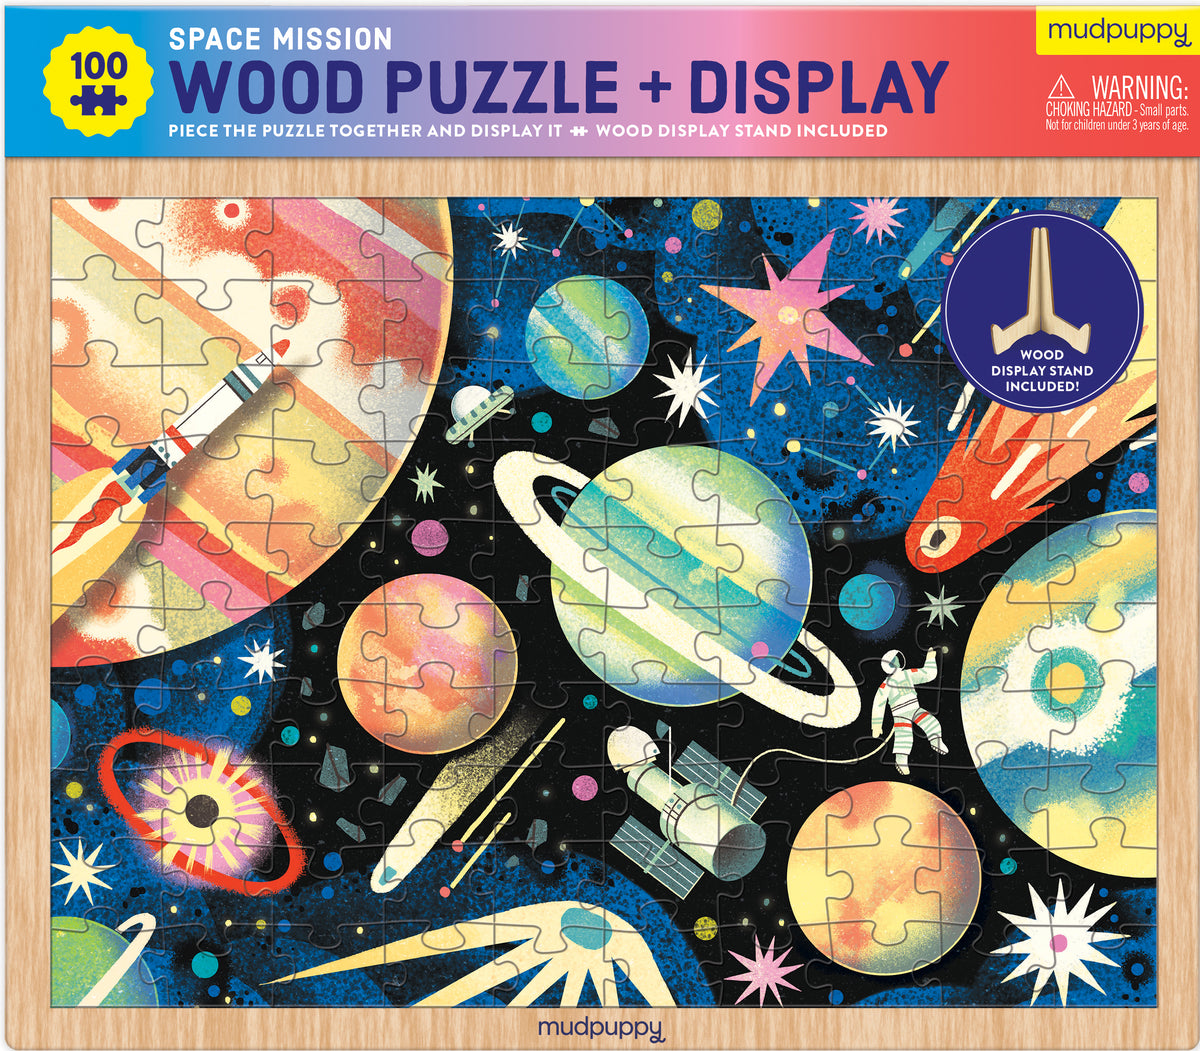 SPACE MISSION 100 PIECE FRAME WOOD PUZZLE + DISPLAY